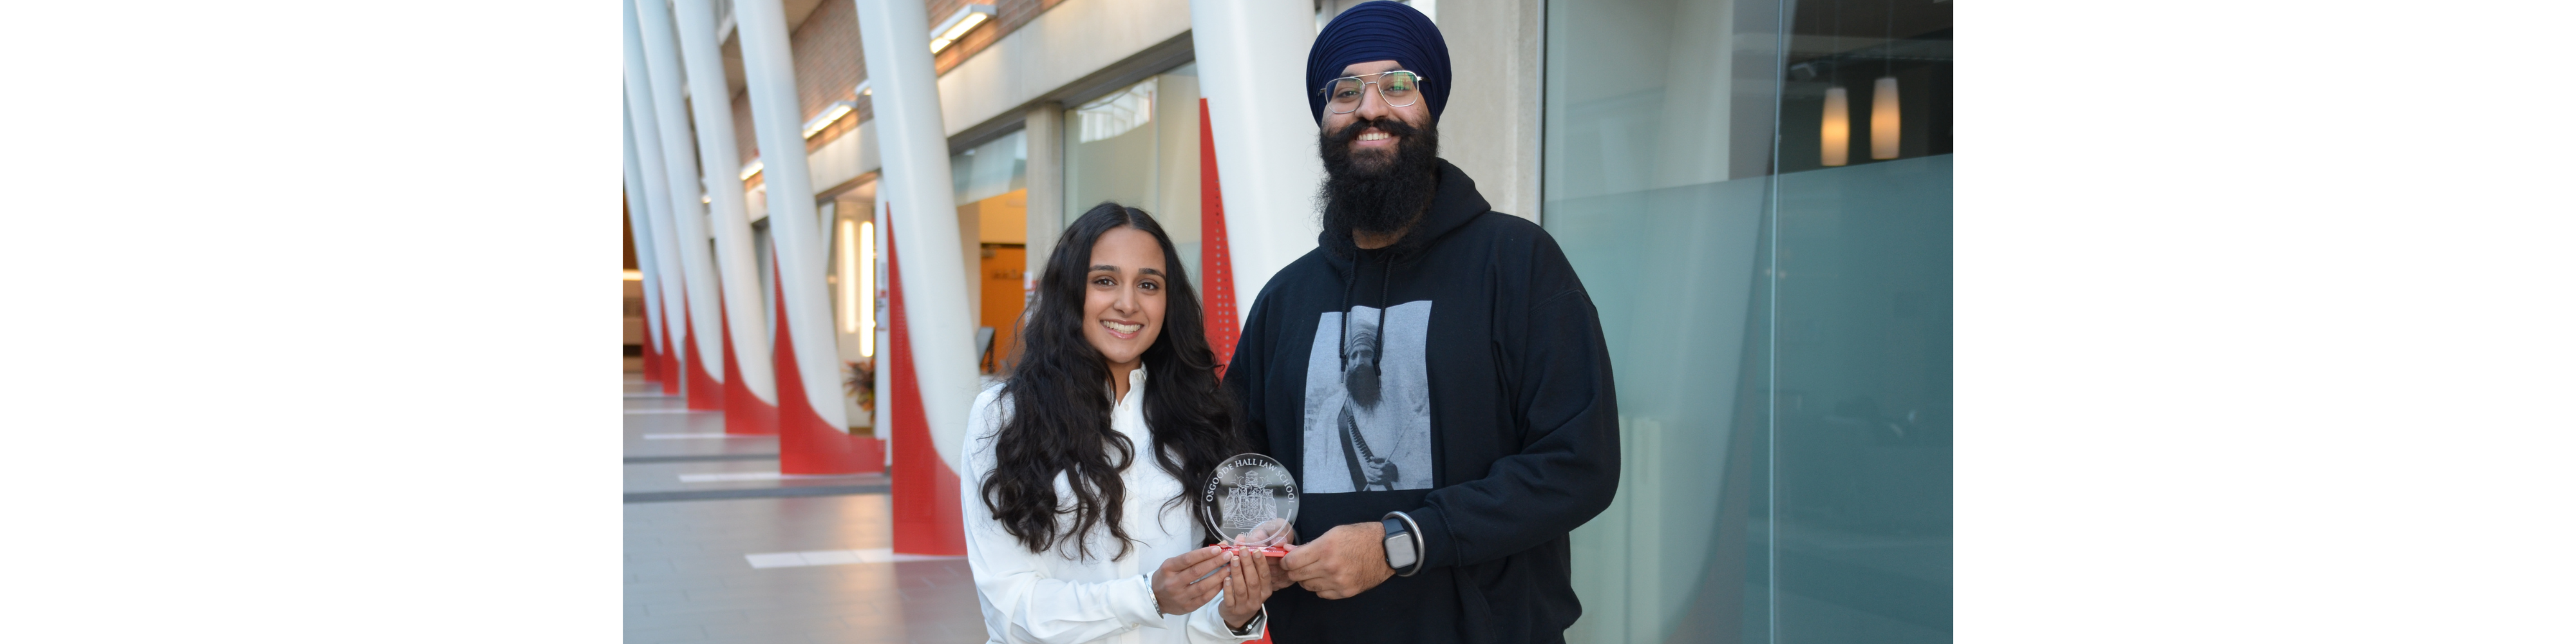 Photo of Osgoode Sikh Students' Association Co-Presidents Tripat Kaur Sandhu (left) and Dalraj Gill in Gowling's Hall